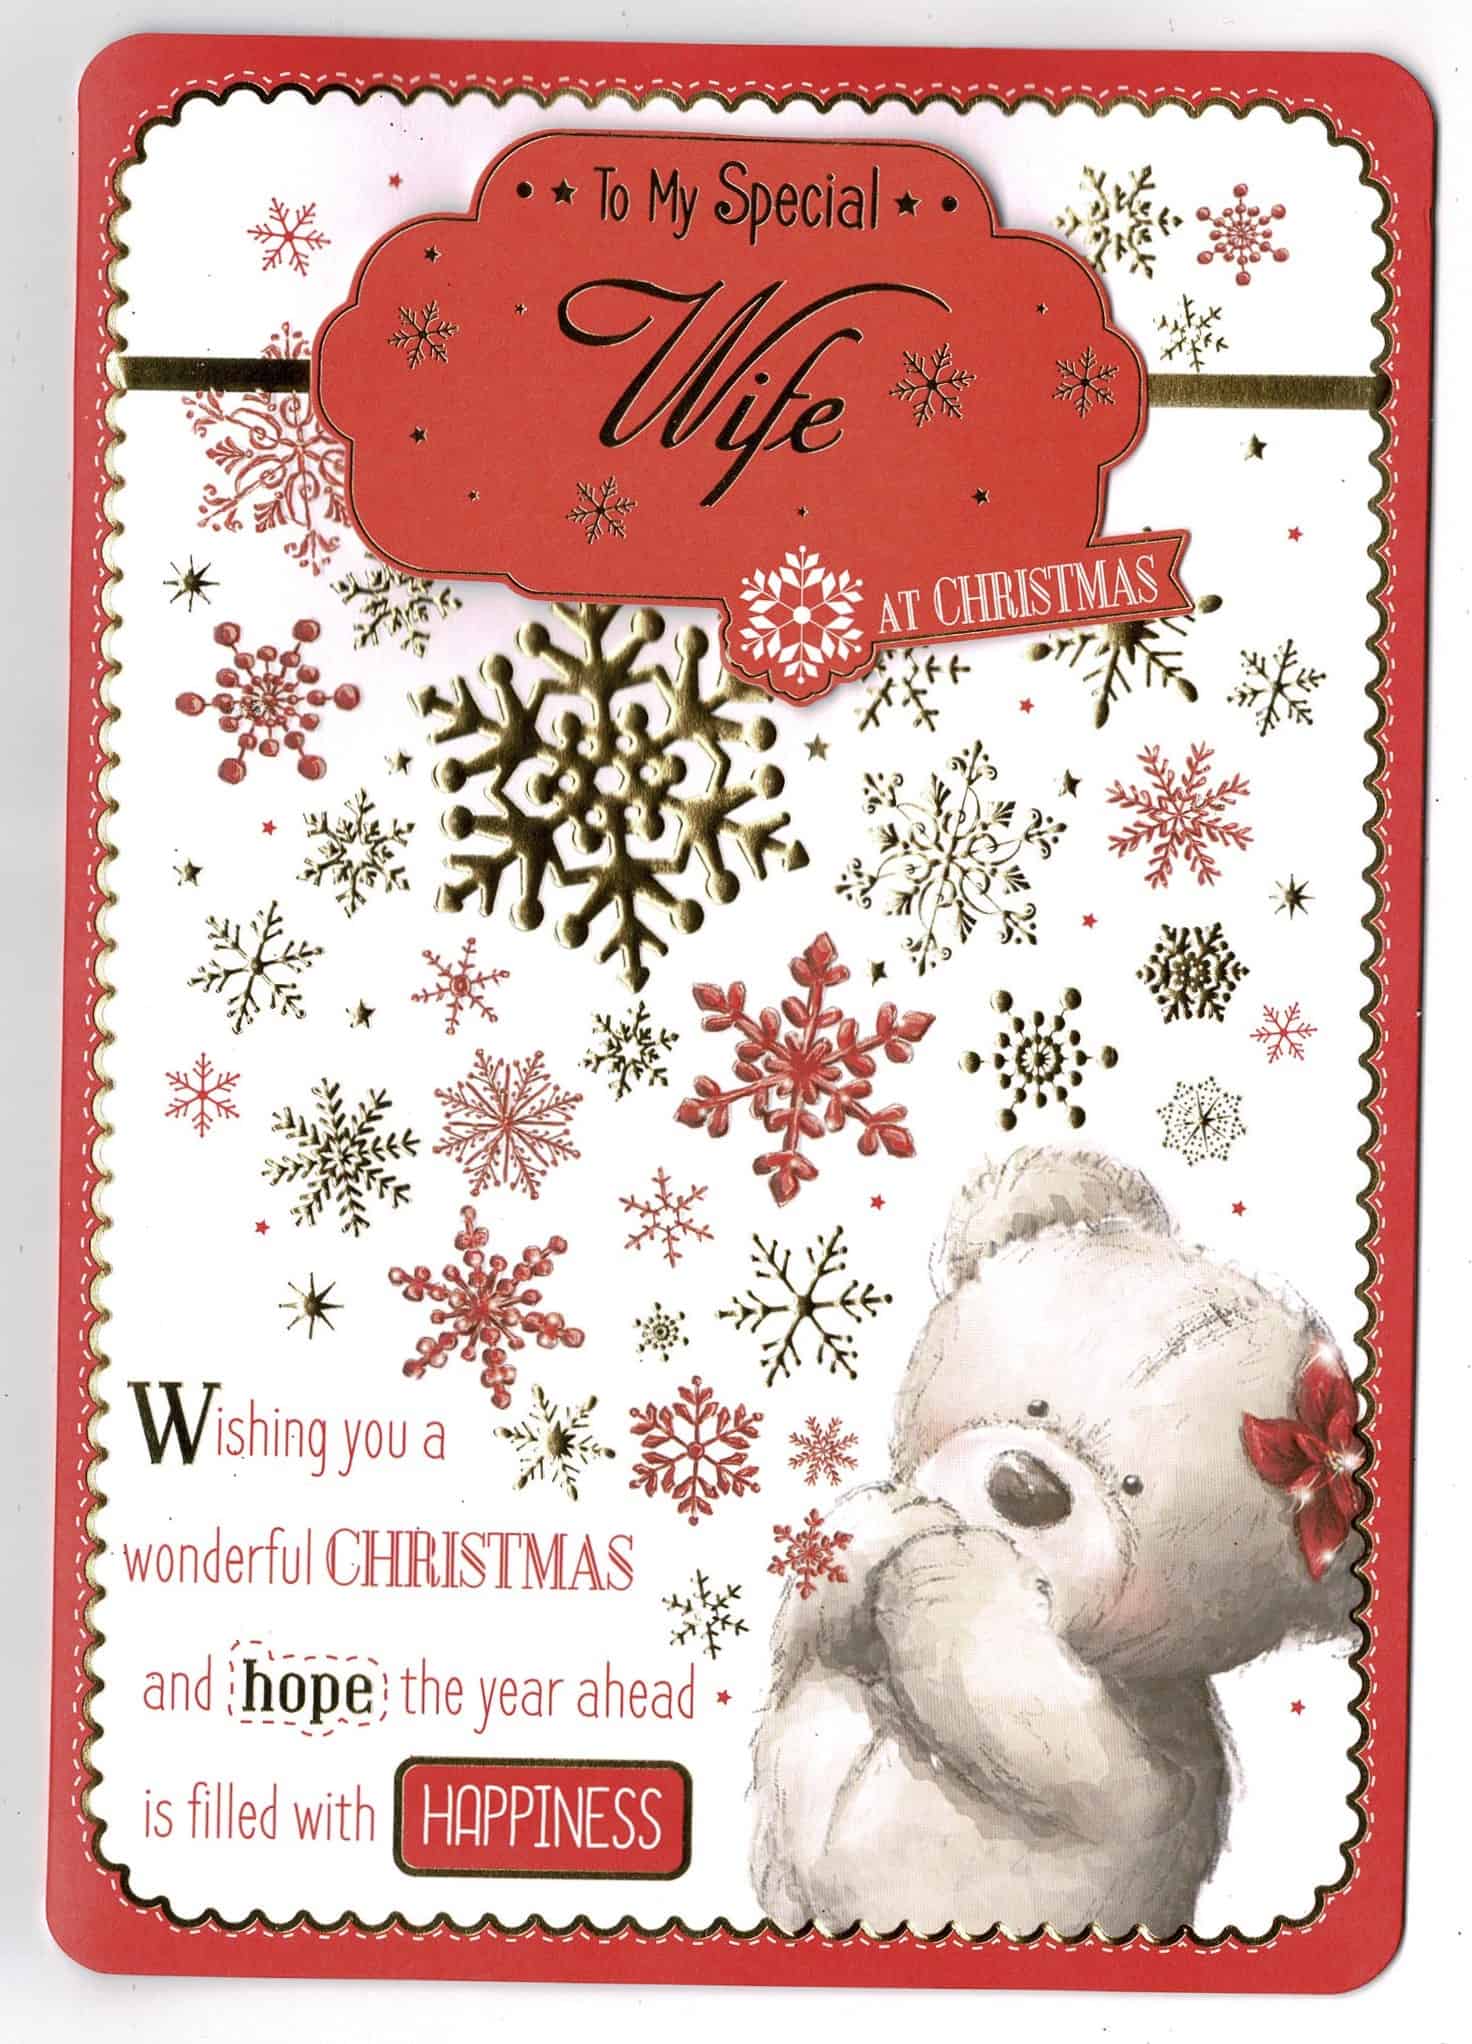 Wife Christmas Card 'To My Special Wife' | eBay